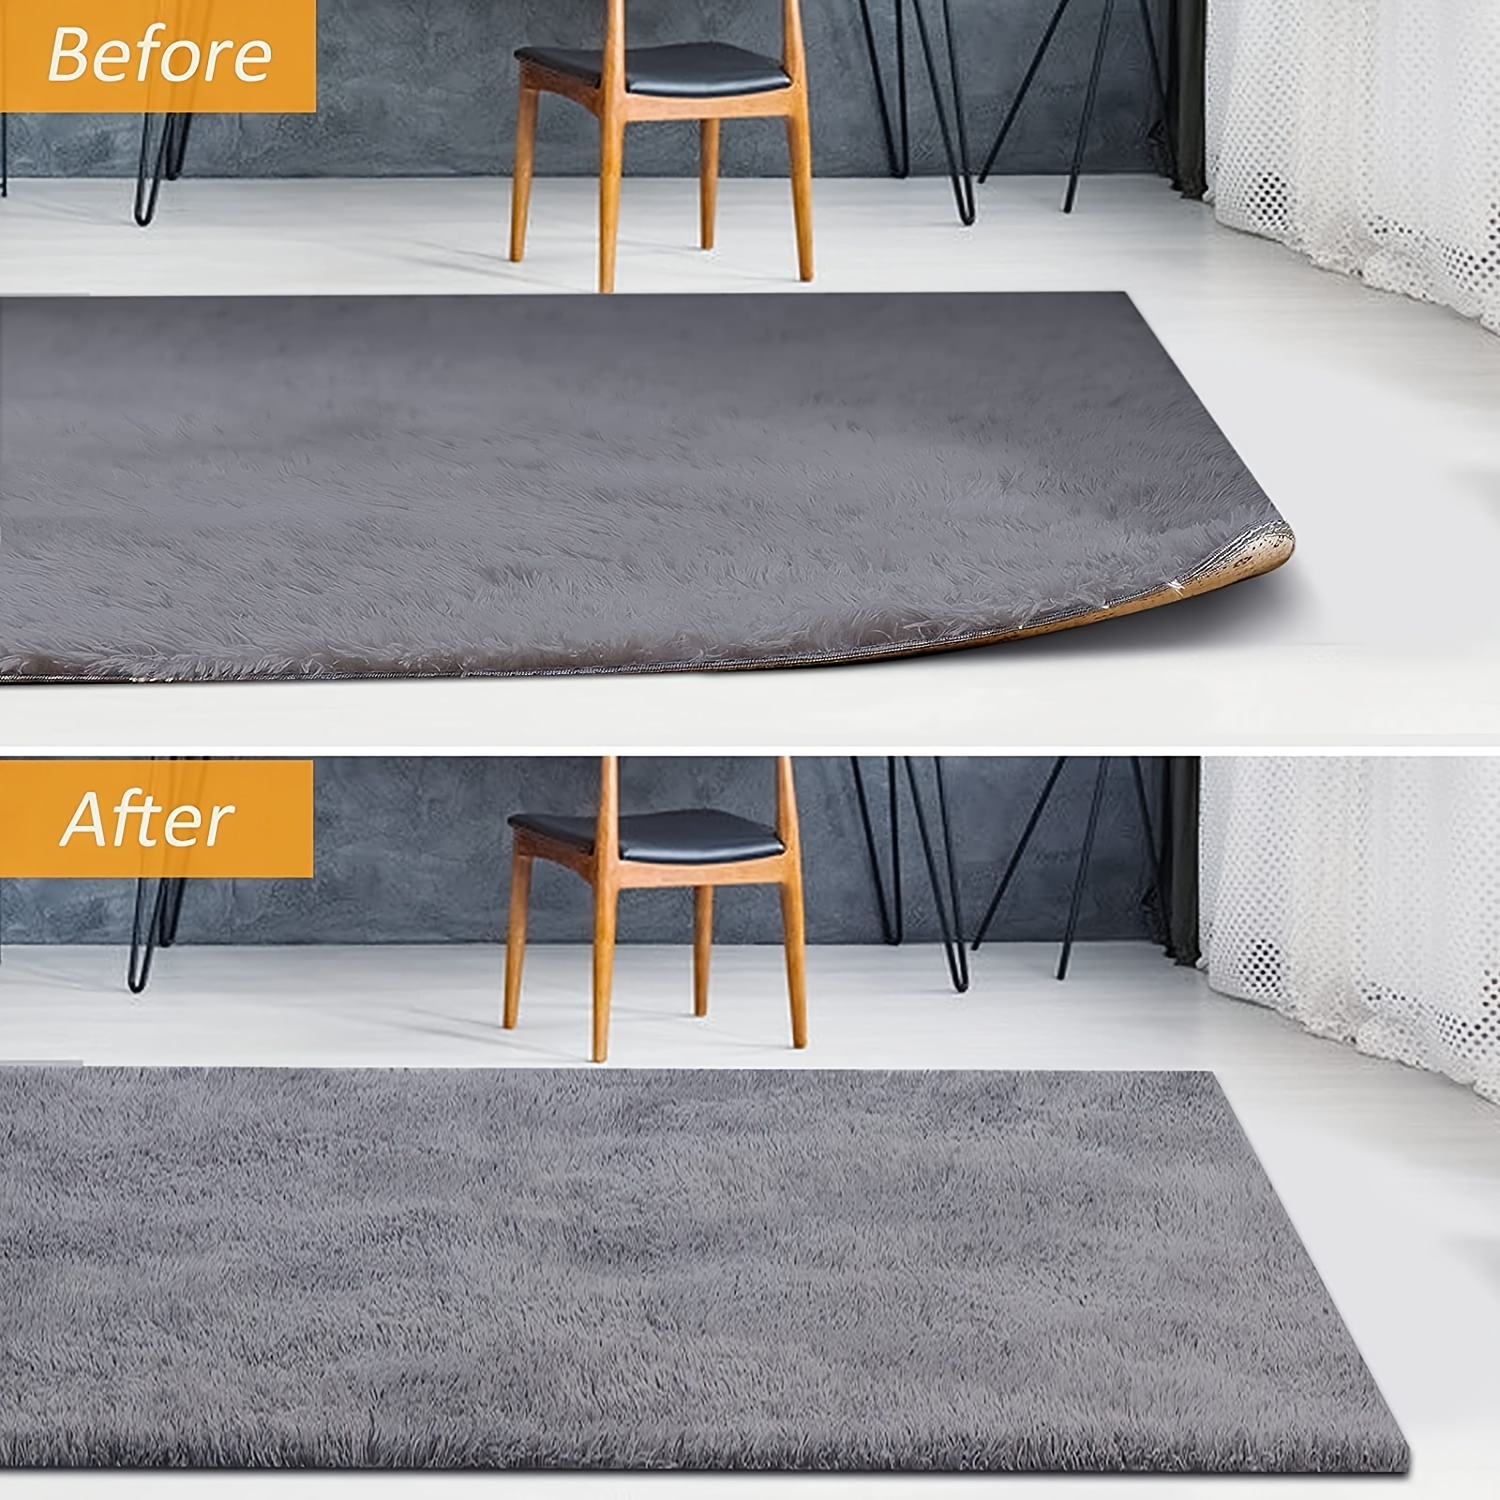 8pcs Double-Sided Non-Slip Rug Pads: Keep Your Rugs Securely in Place on  Hardwood Floors & Tiles!